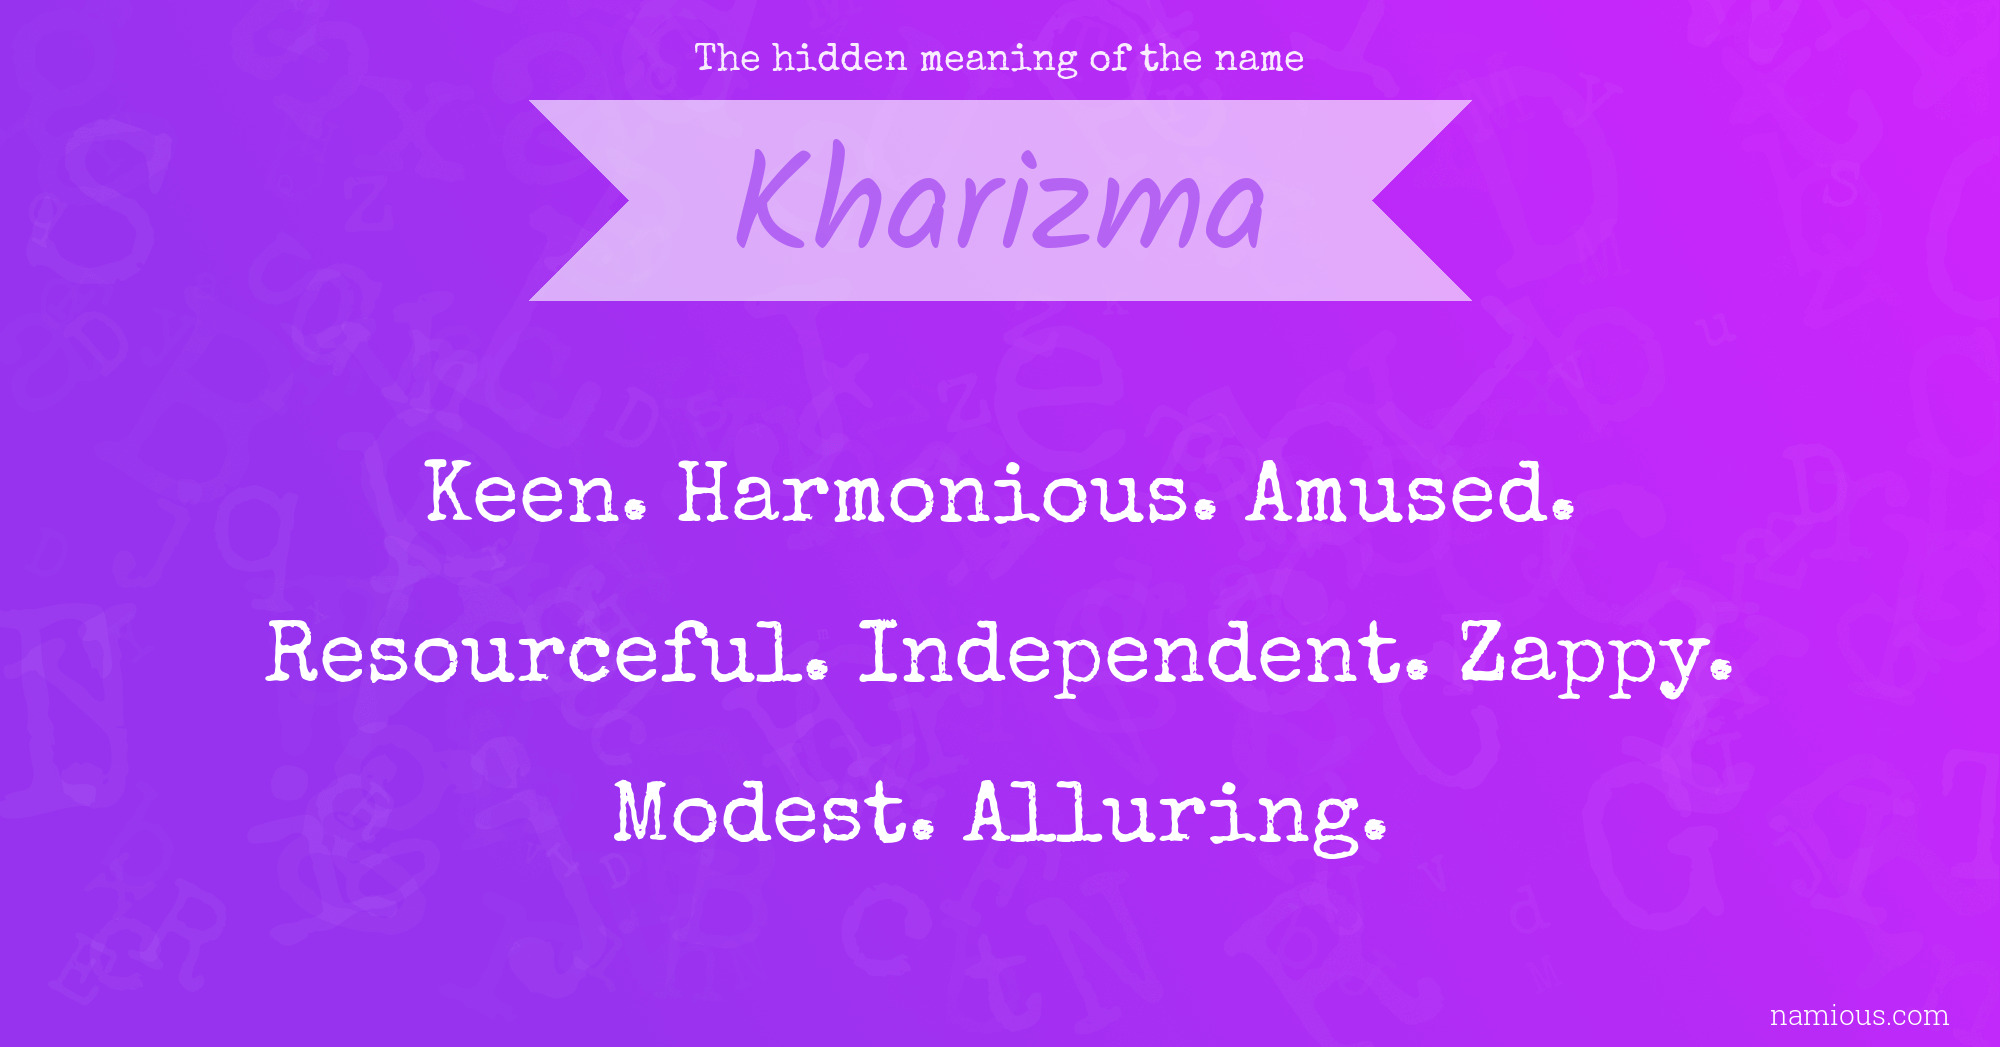 The hidden meaning of the name Kharizma